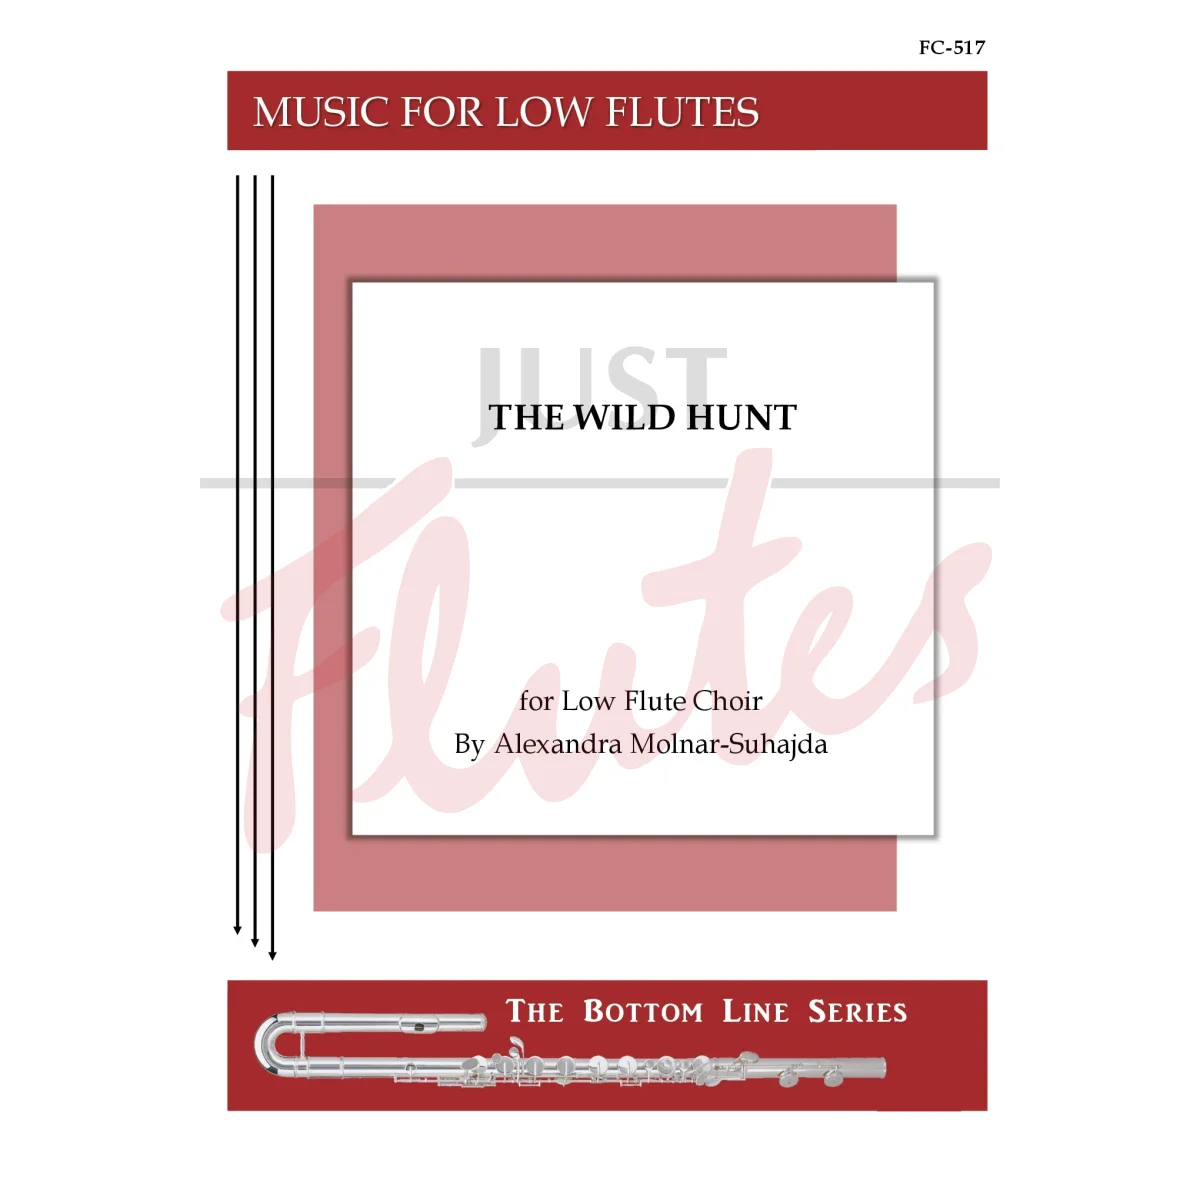 The Wild Hunt for Low Flute Choir